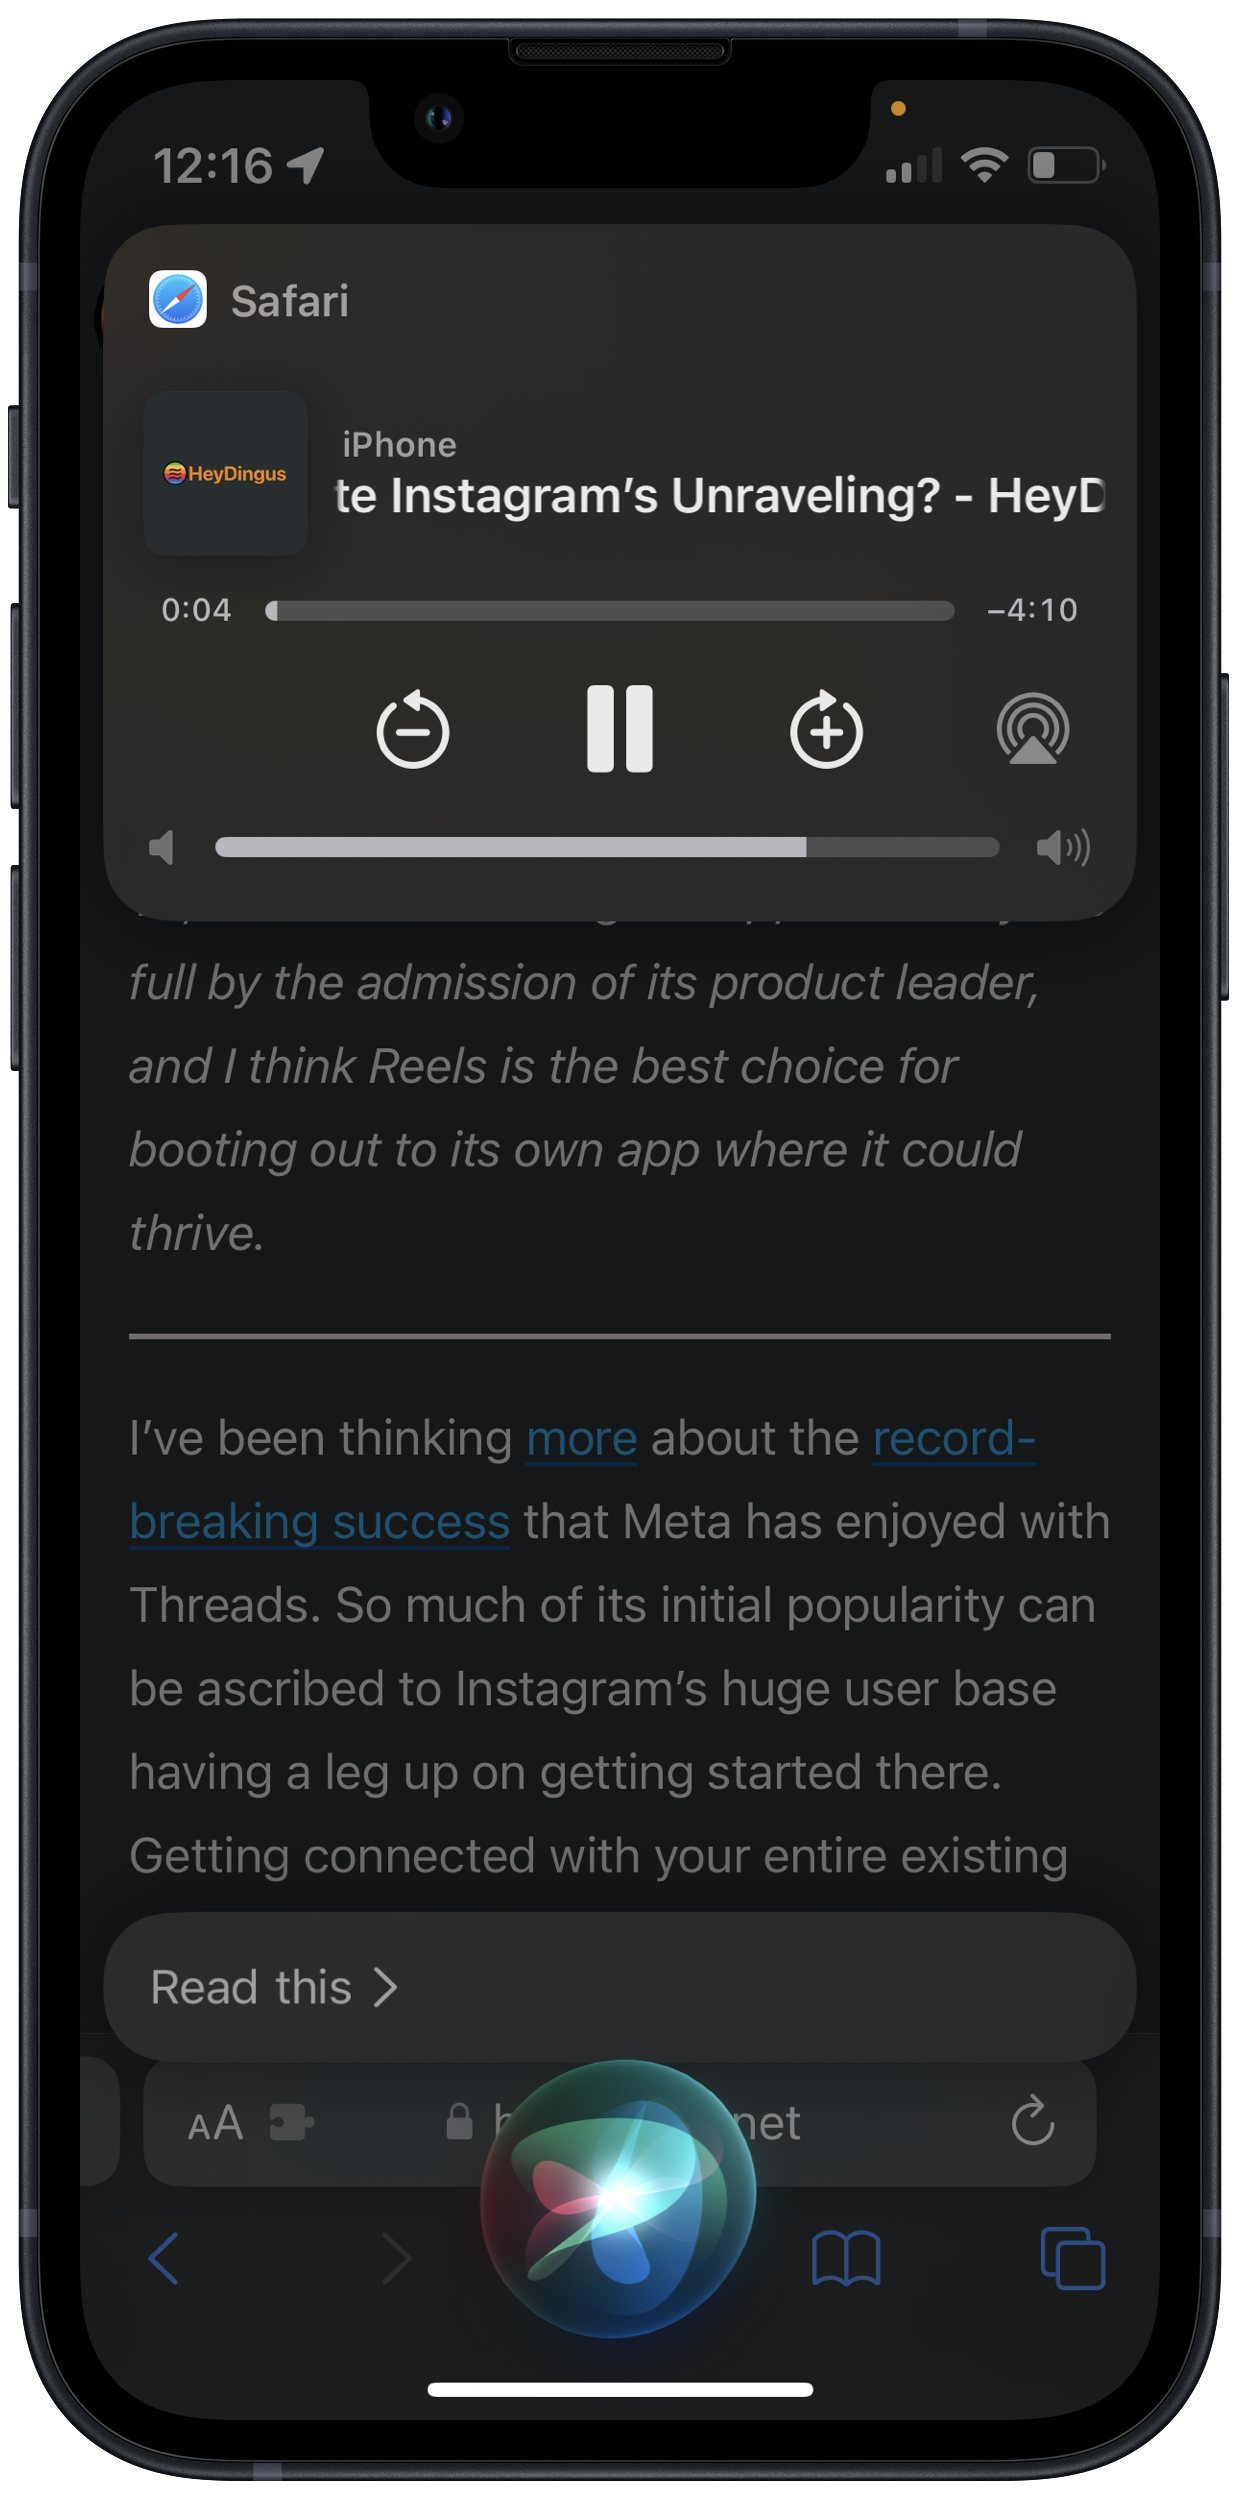 Asking Siri to read the page brings up a narration of the article with Now Playing controls.